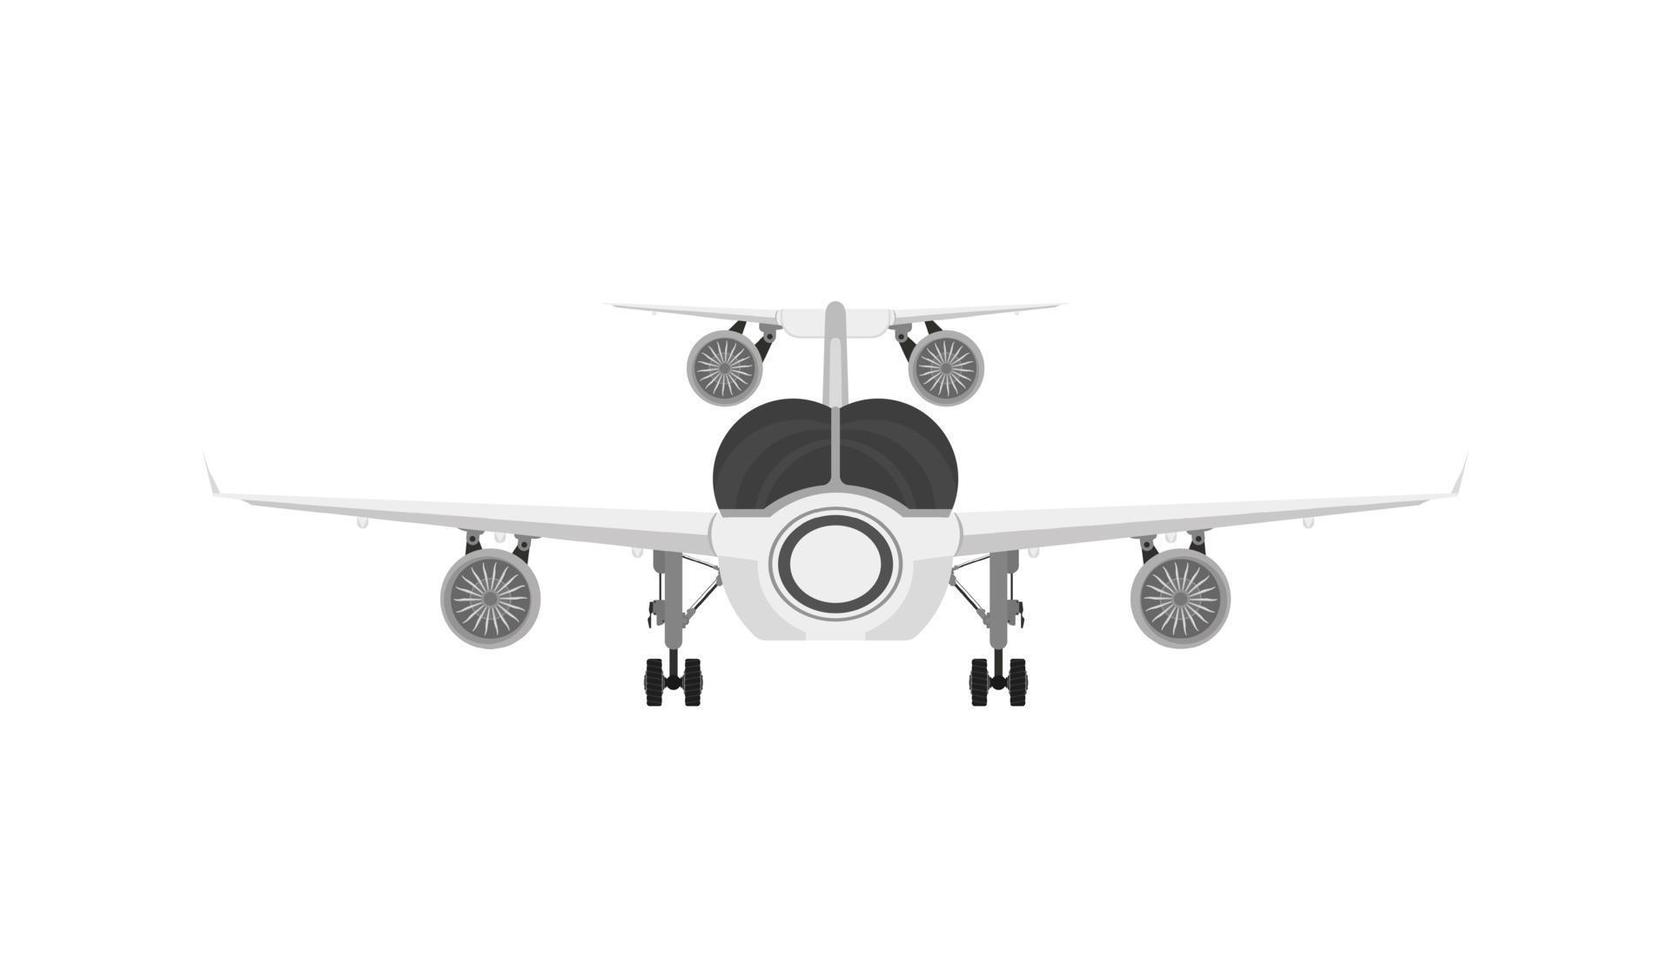 Flying Boeing airliner isolated on white, front view. vector